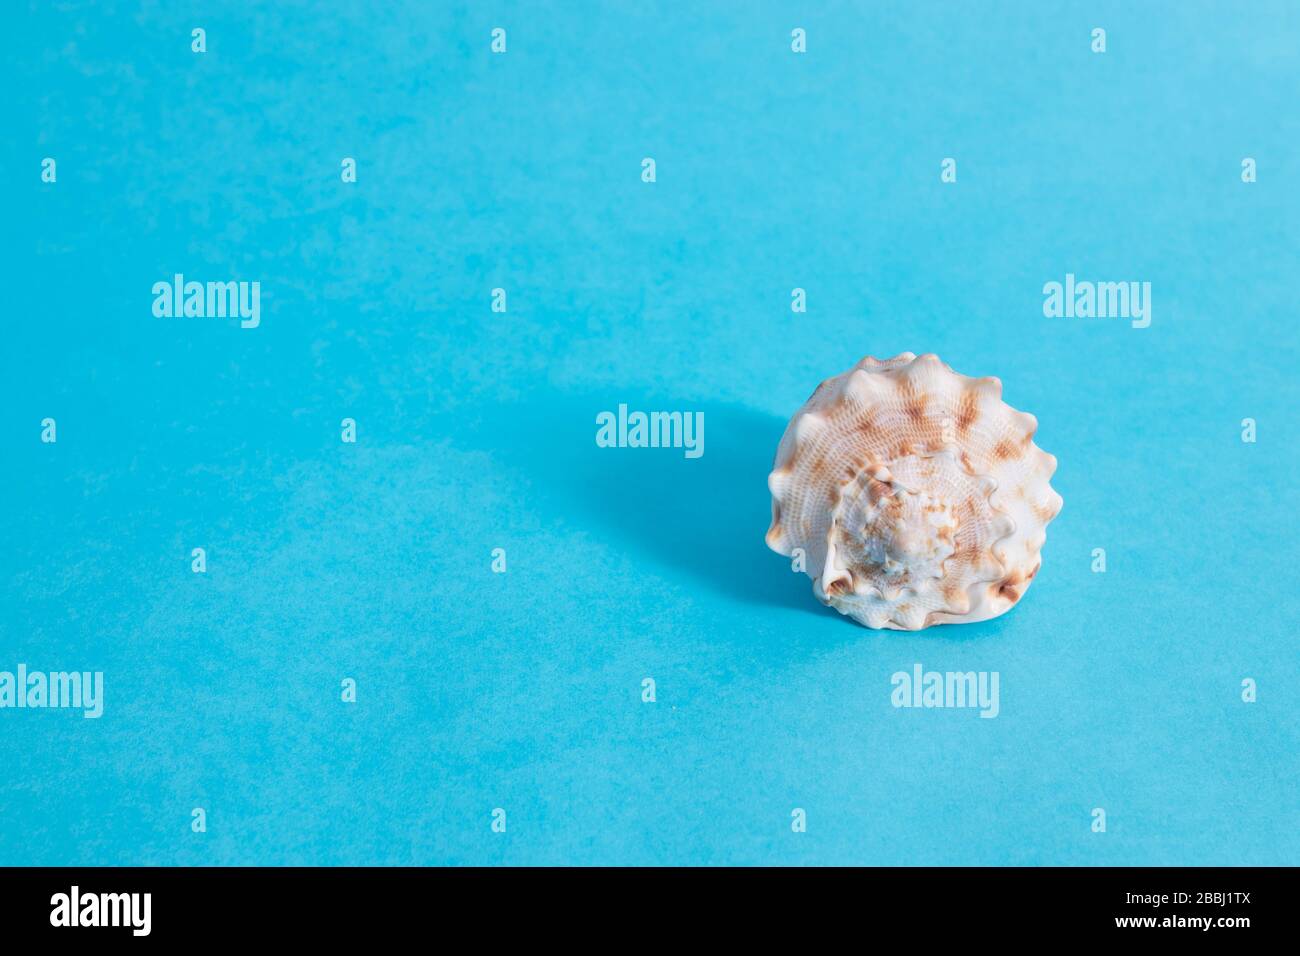 Seashell on blue background with blank space. Concept. Stock Photo